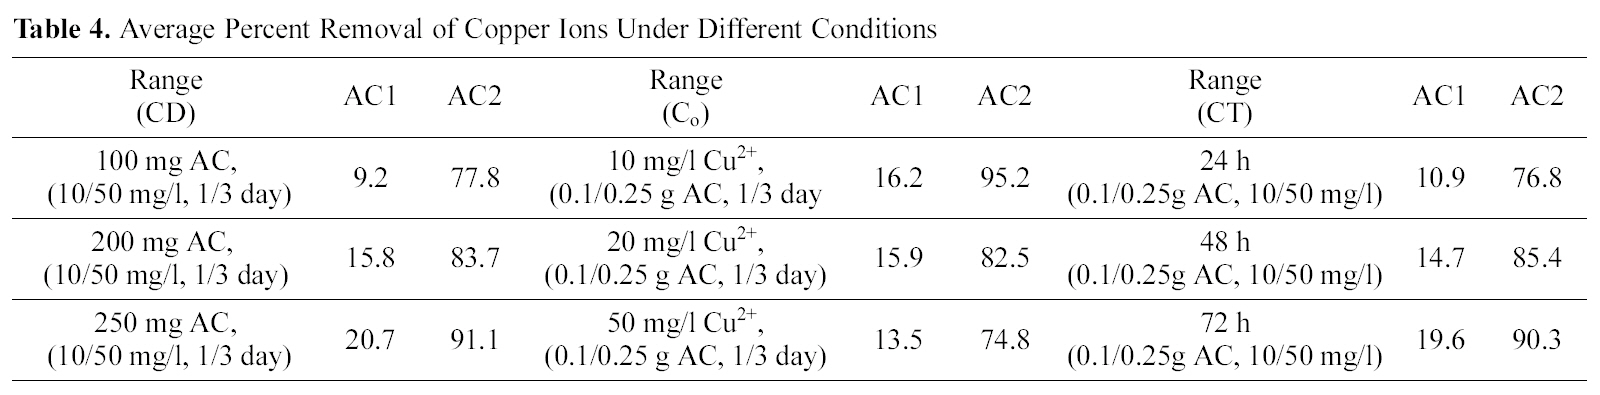 Average Percent Removal of Copper Ions Under Different Conditions